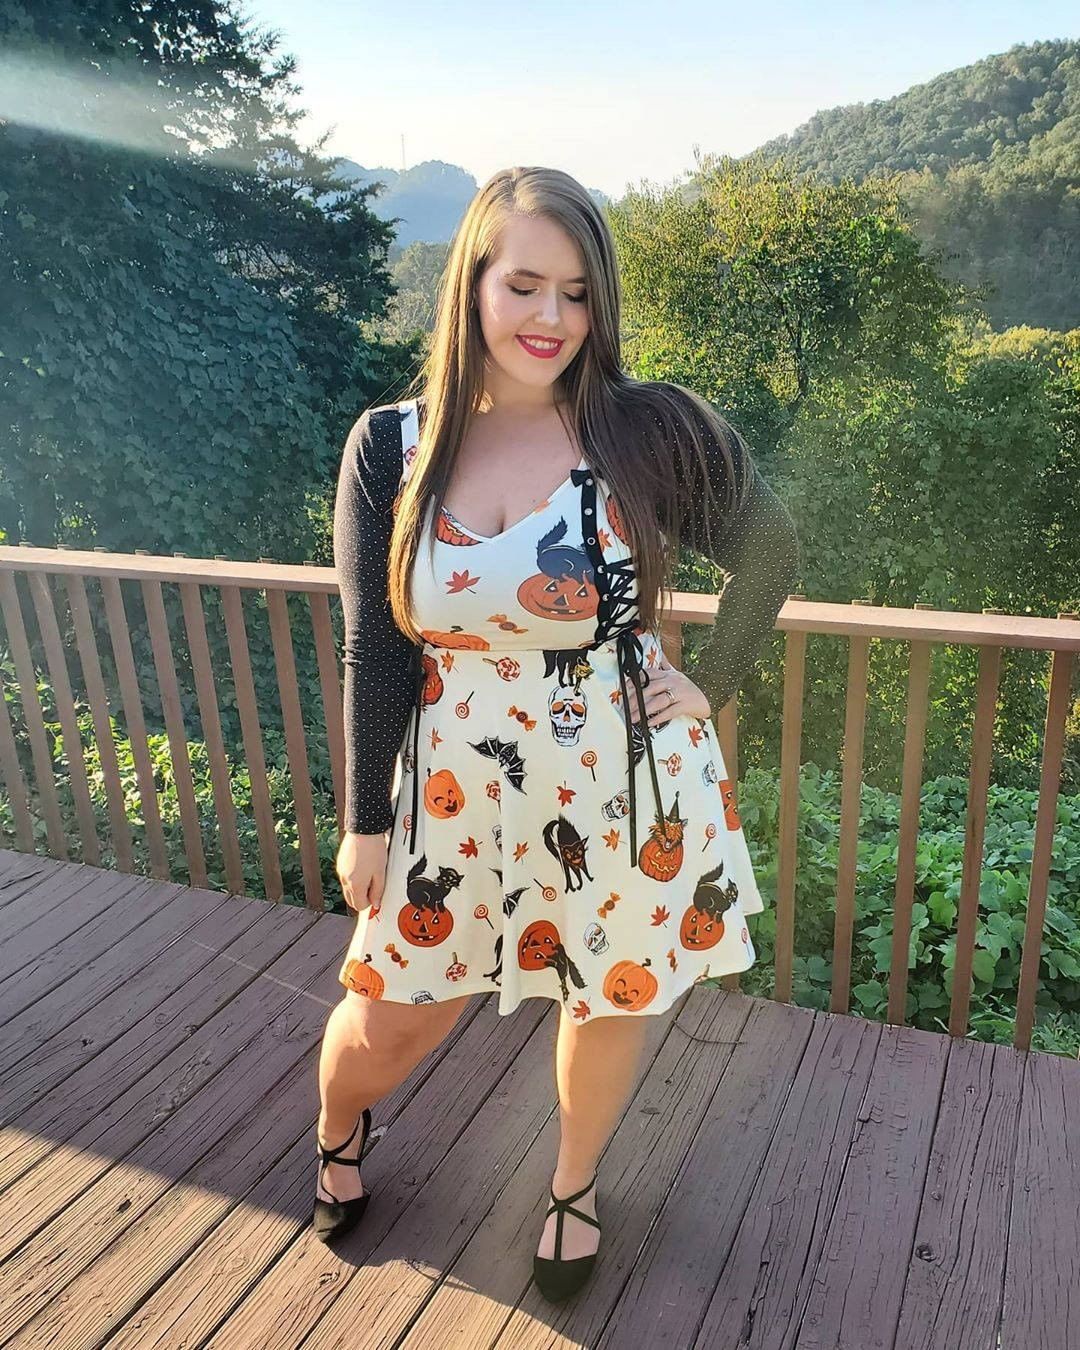 Dresslily - "🖤My heart just about exploded when I saw this Halloween dress from @dresslily 🎃 The print feels so vintage, and the lace-up detail is so cute"
💕Thanks @hollylindsey_ for this cute review!...